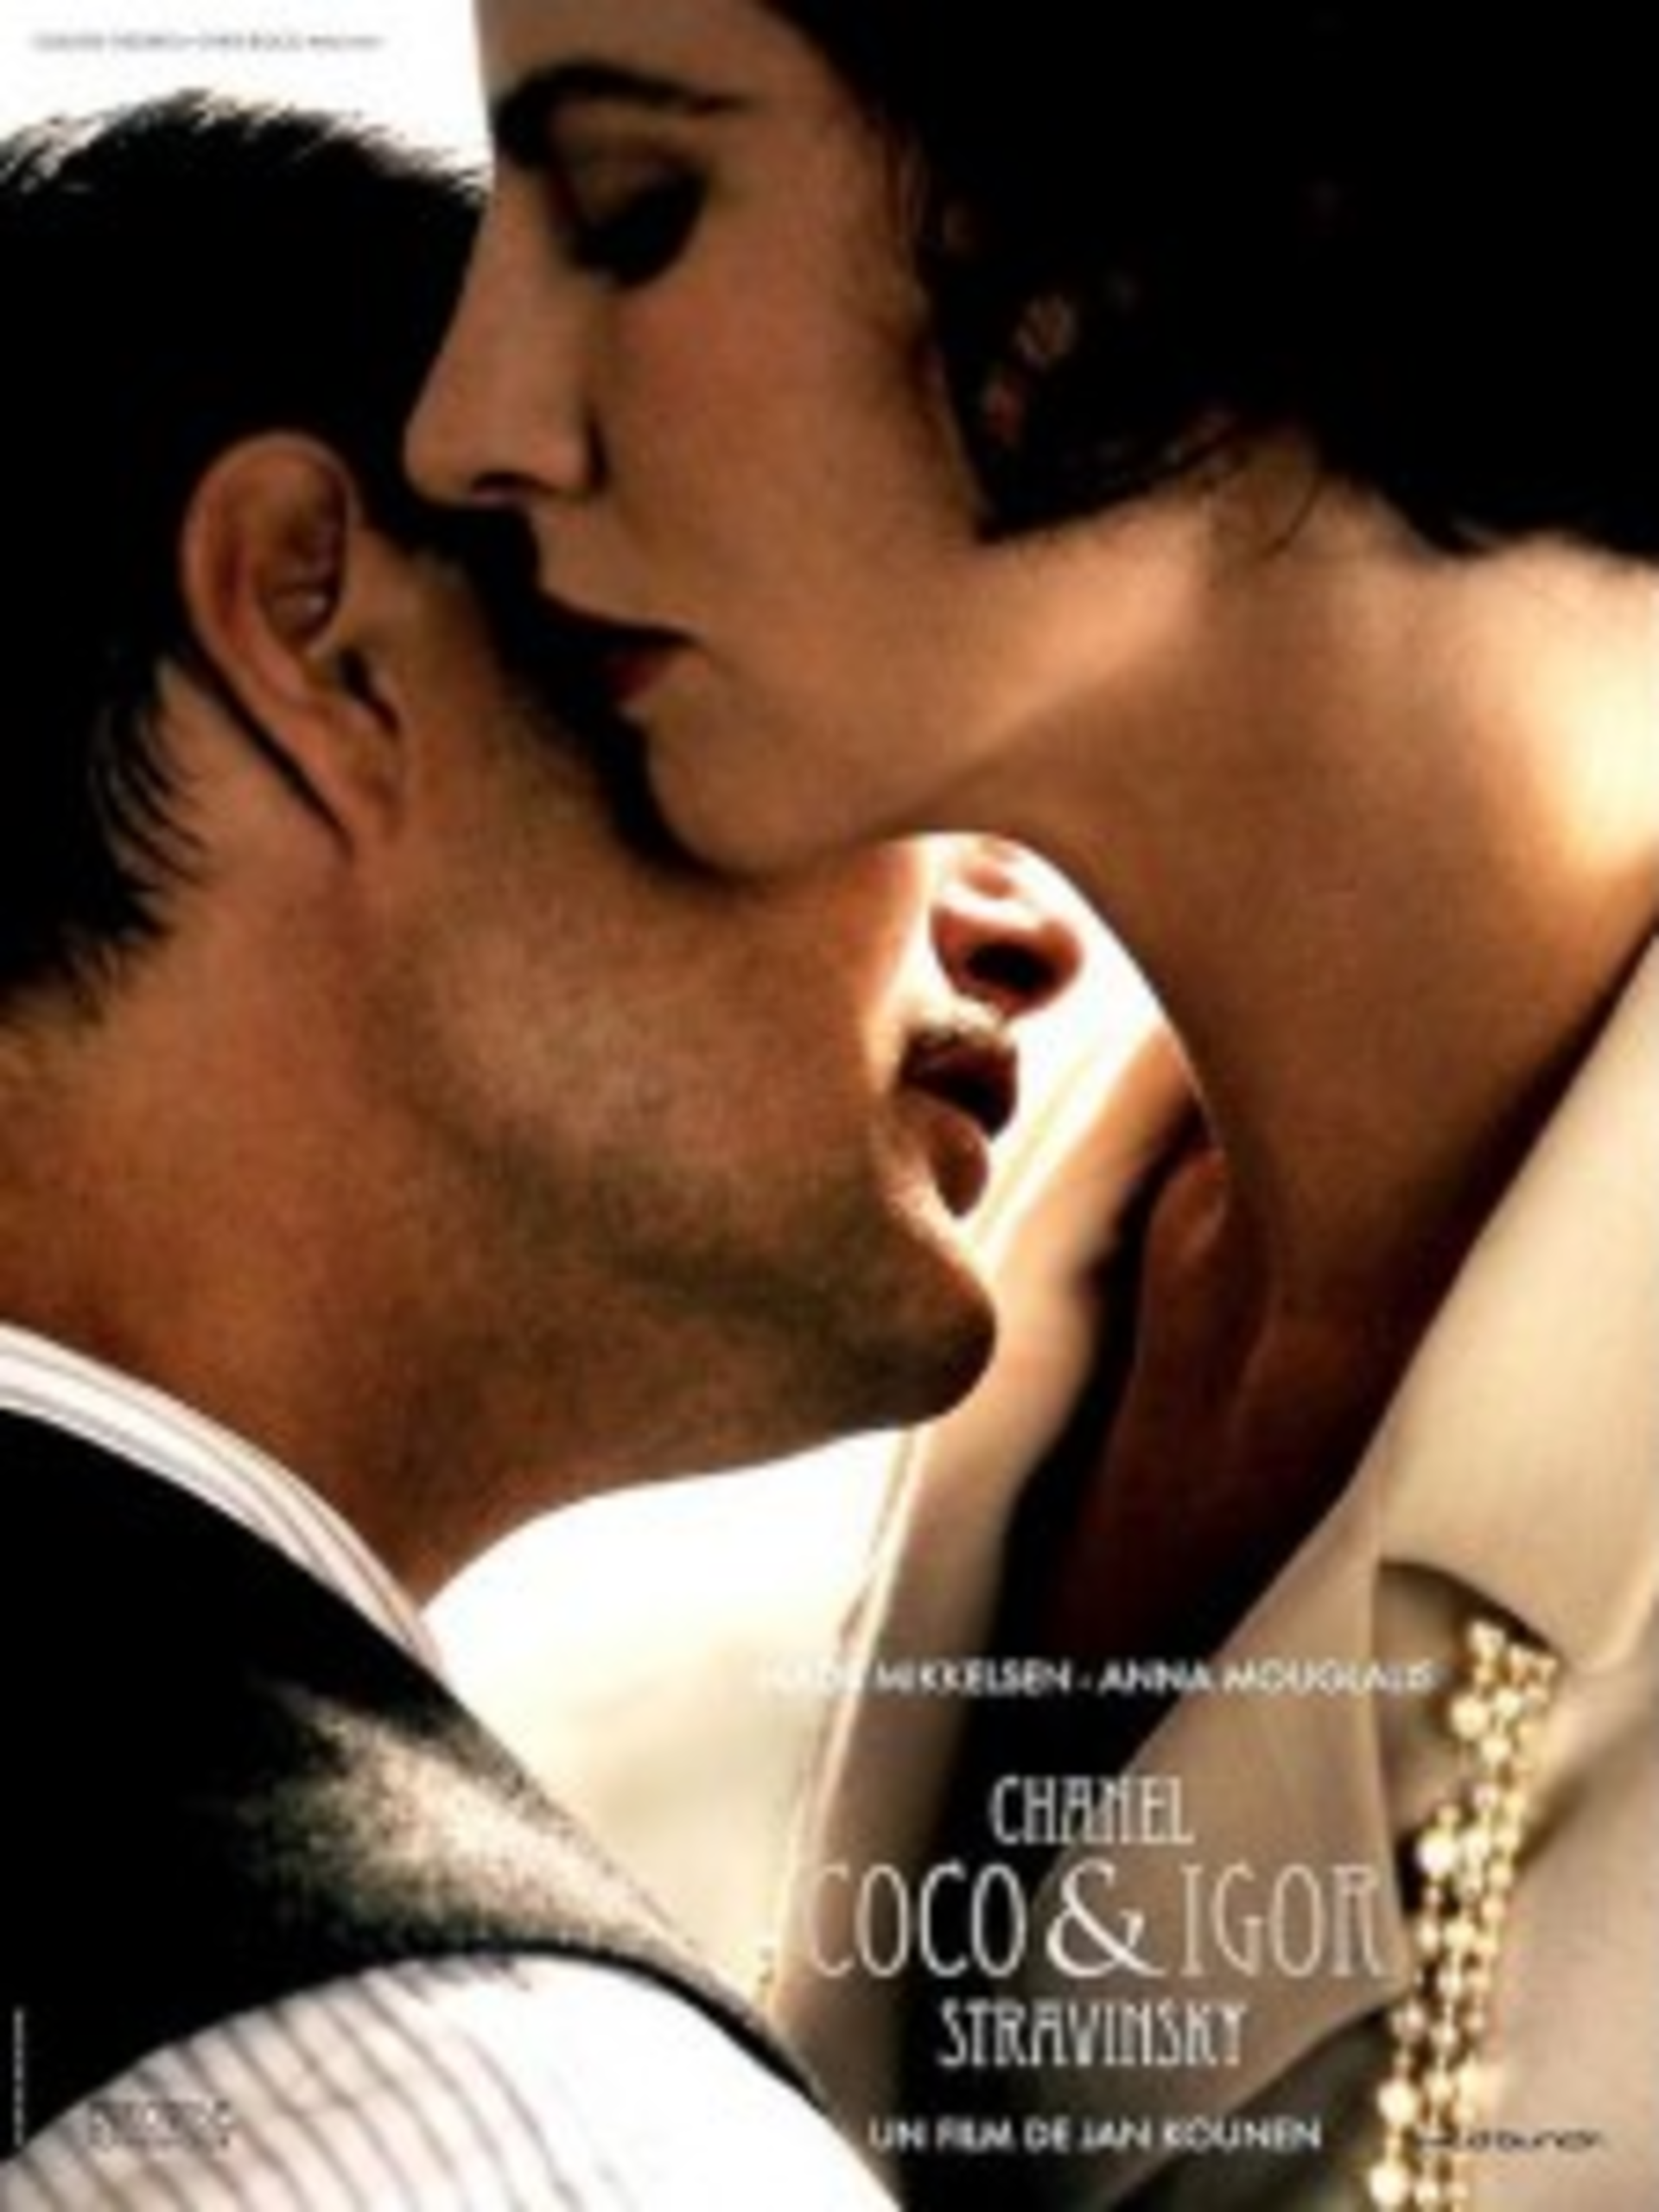 The Rabid Film Review: Coco Chanel & Igor Stravinsky, a film by Jan Kounen,  starring Anna Mouglalis and Mads Mikkelsen (with trailer video), Events &  Film, Tampa